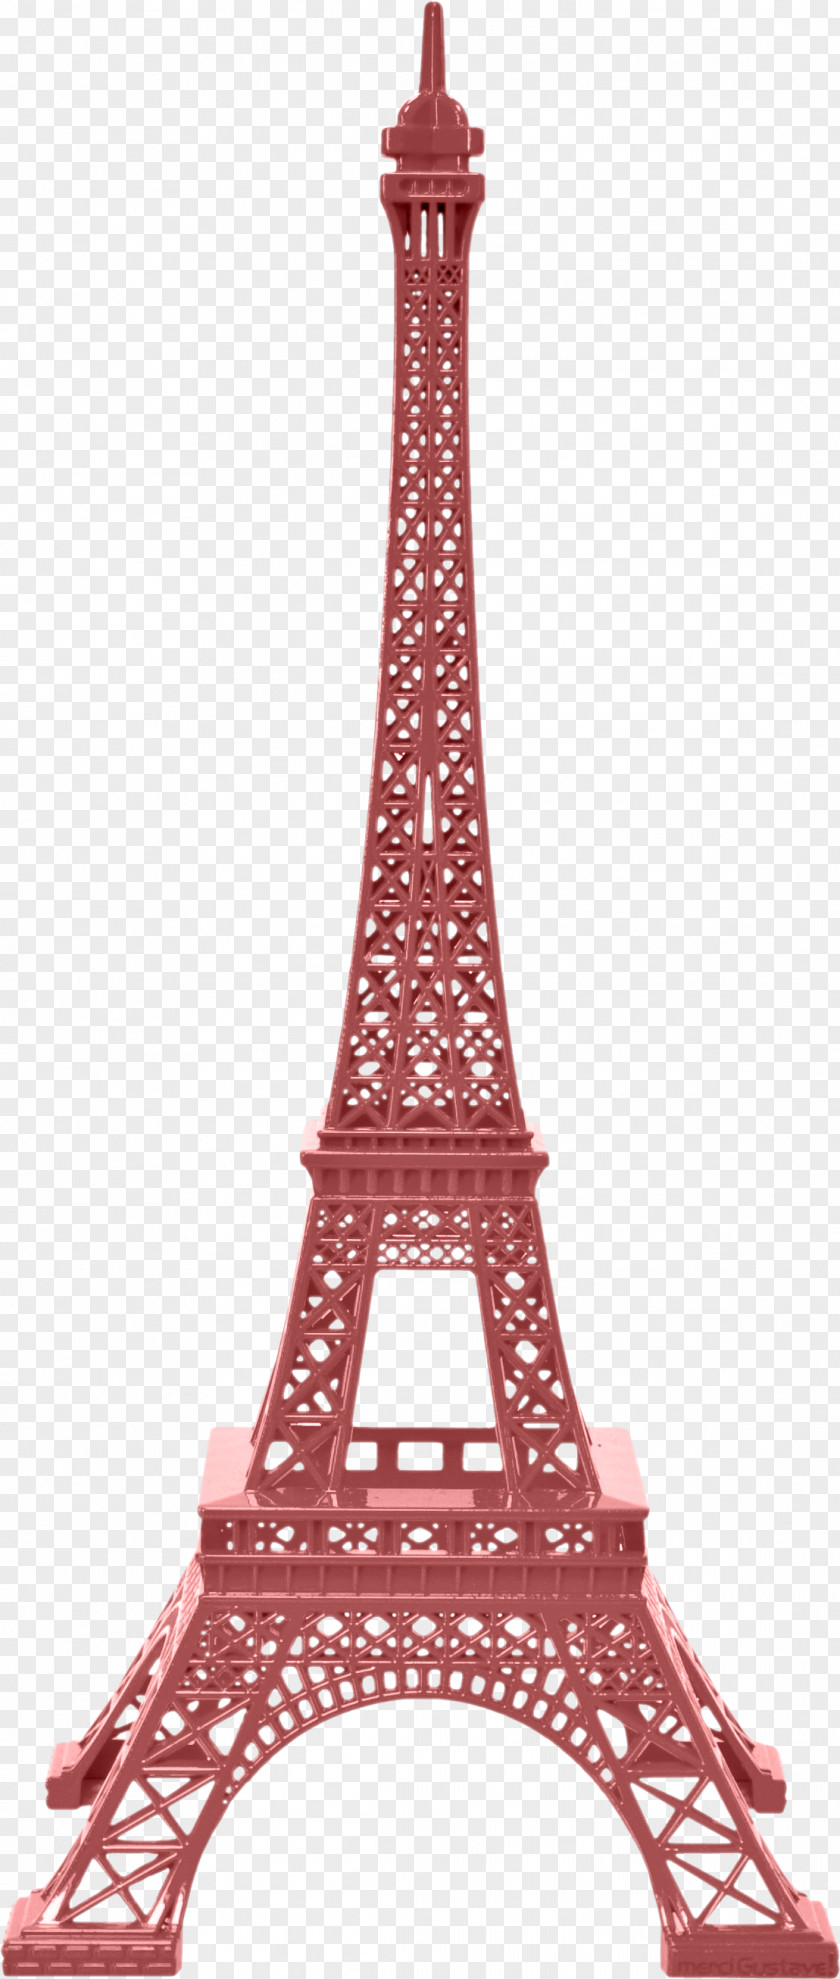 Paris Eiffel Tower Statue Of Liberty Black And White PNG